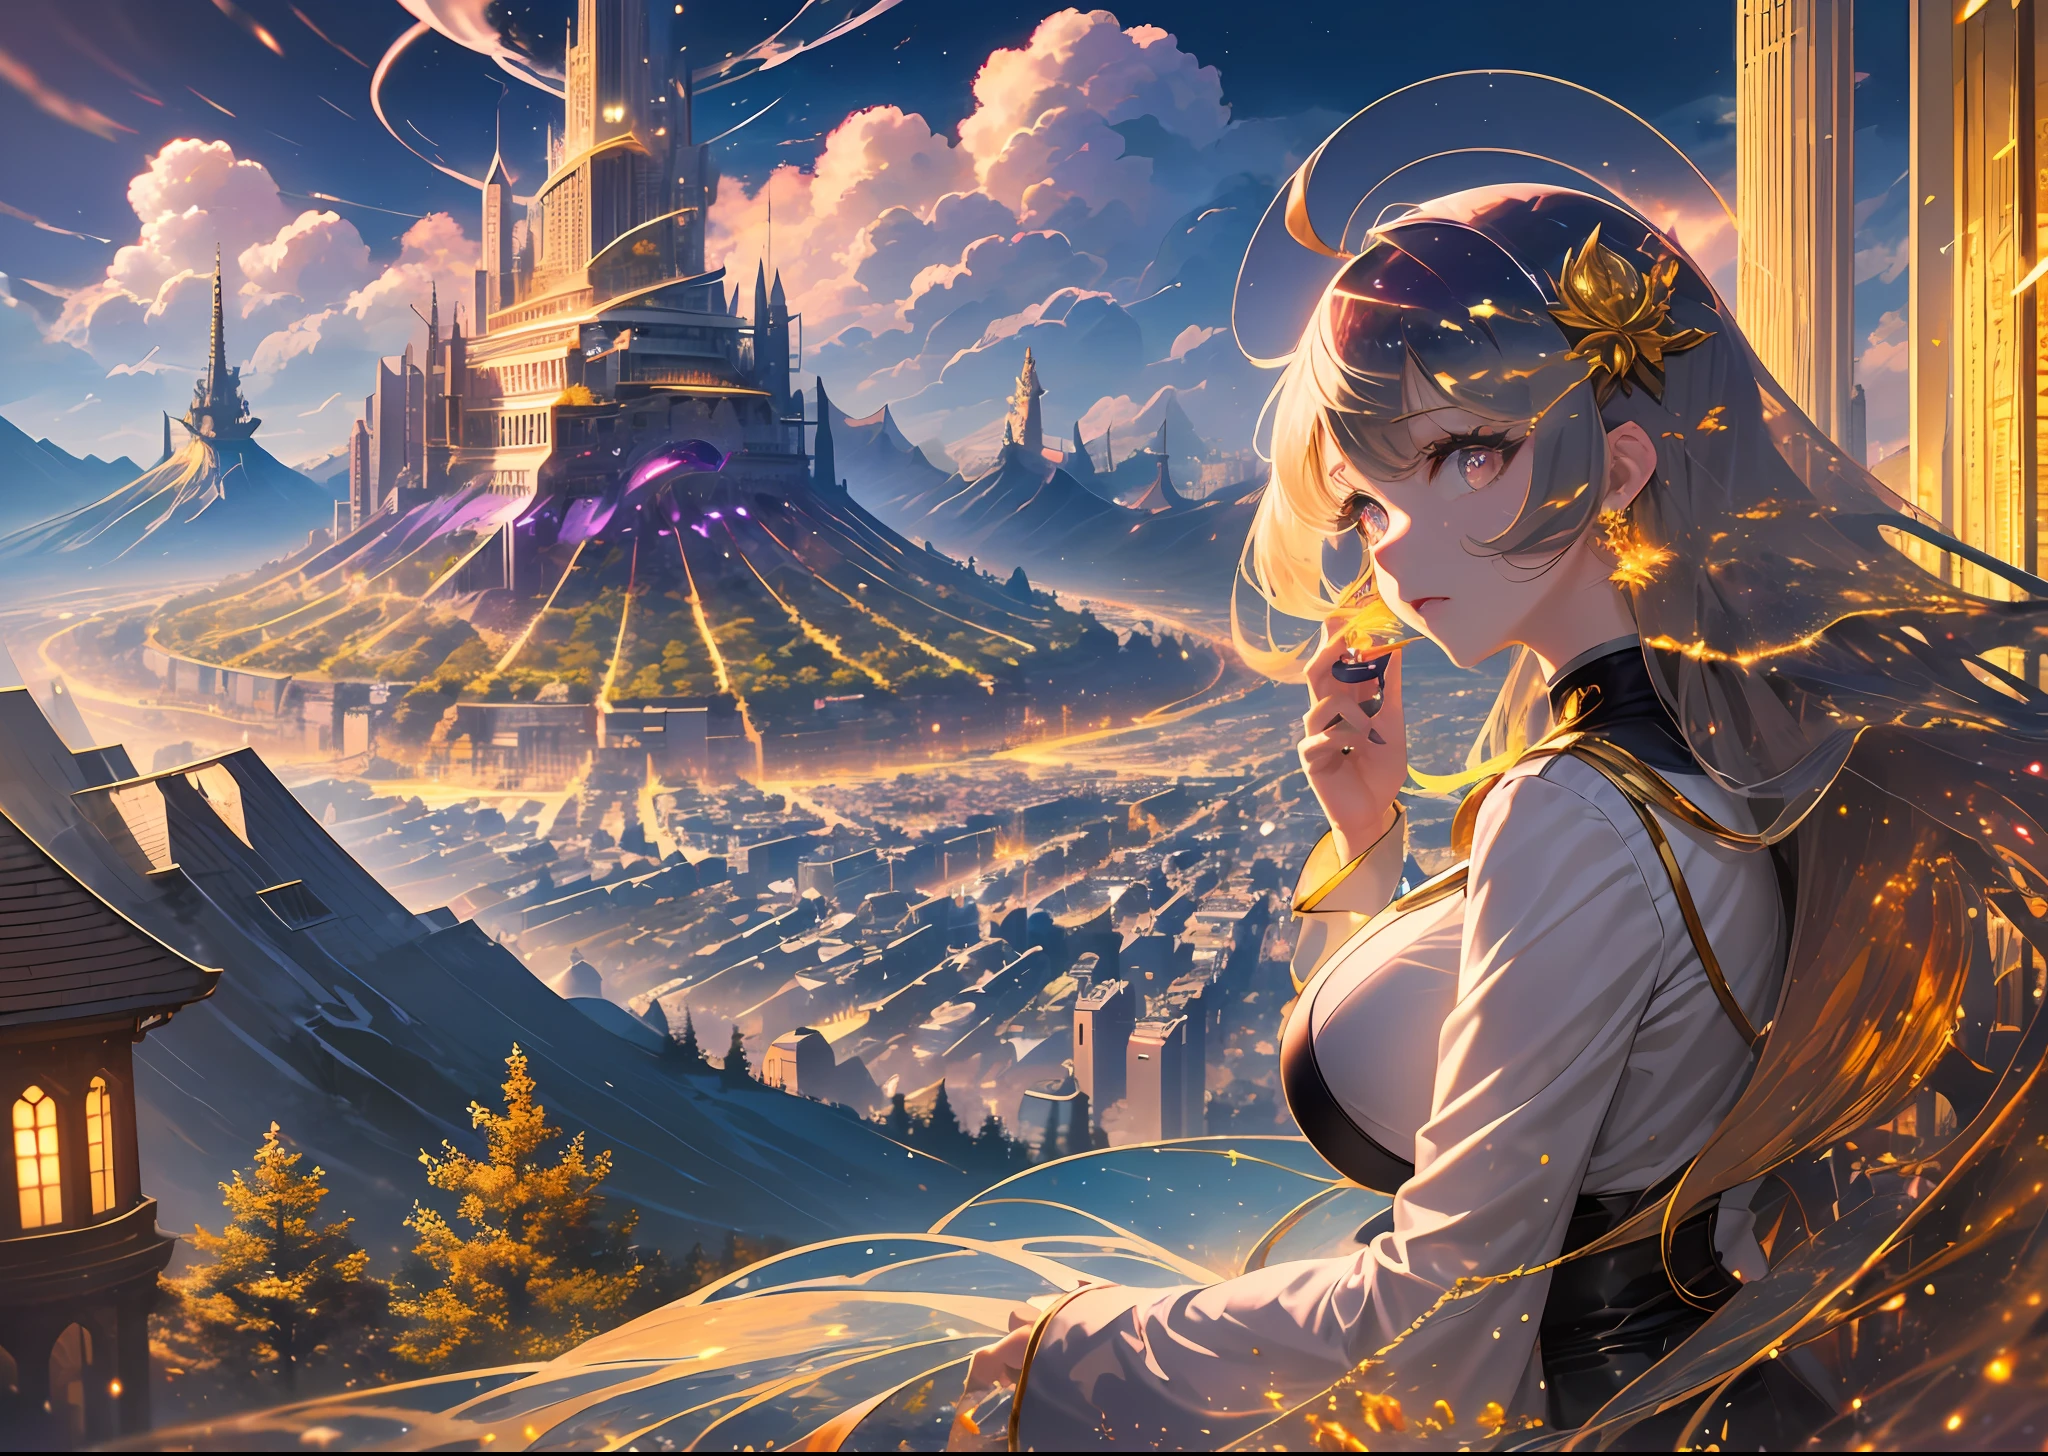 (1girl:1.2), wide shot:1.3,
(Curl inside hair, blonde hair,very long hair:1), 
(glows ultra-detailed deep Amethyst eyes:1.2), (gradient eyes, finely detailed beautiful eyes, symmetrical eyes:1.1), (big highlight on eyes:1.2),
(The protagonist overlooking the demonic city from above:1.2), 
(The traveler stands atop the hill, overlooking a vast, fantastical city that stretches as far as the eye can see. And beyond that, towering a gigantic, golden tree shining with radiance, creating a magical world:1.5),
(The enormous shining golden tree:1.1),
break,
(blue sky, clear weather:1),
,
(masterpiece:1.3), (illustration:1.1), (best quality:1.1), (best aethetic:1), (beautiful art:1.2), (ultra-detailed:1.2), (8k), (HDR), (sharp focus), (intricate), (more_details:-0.5), (more_details:1.5)